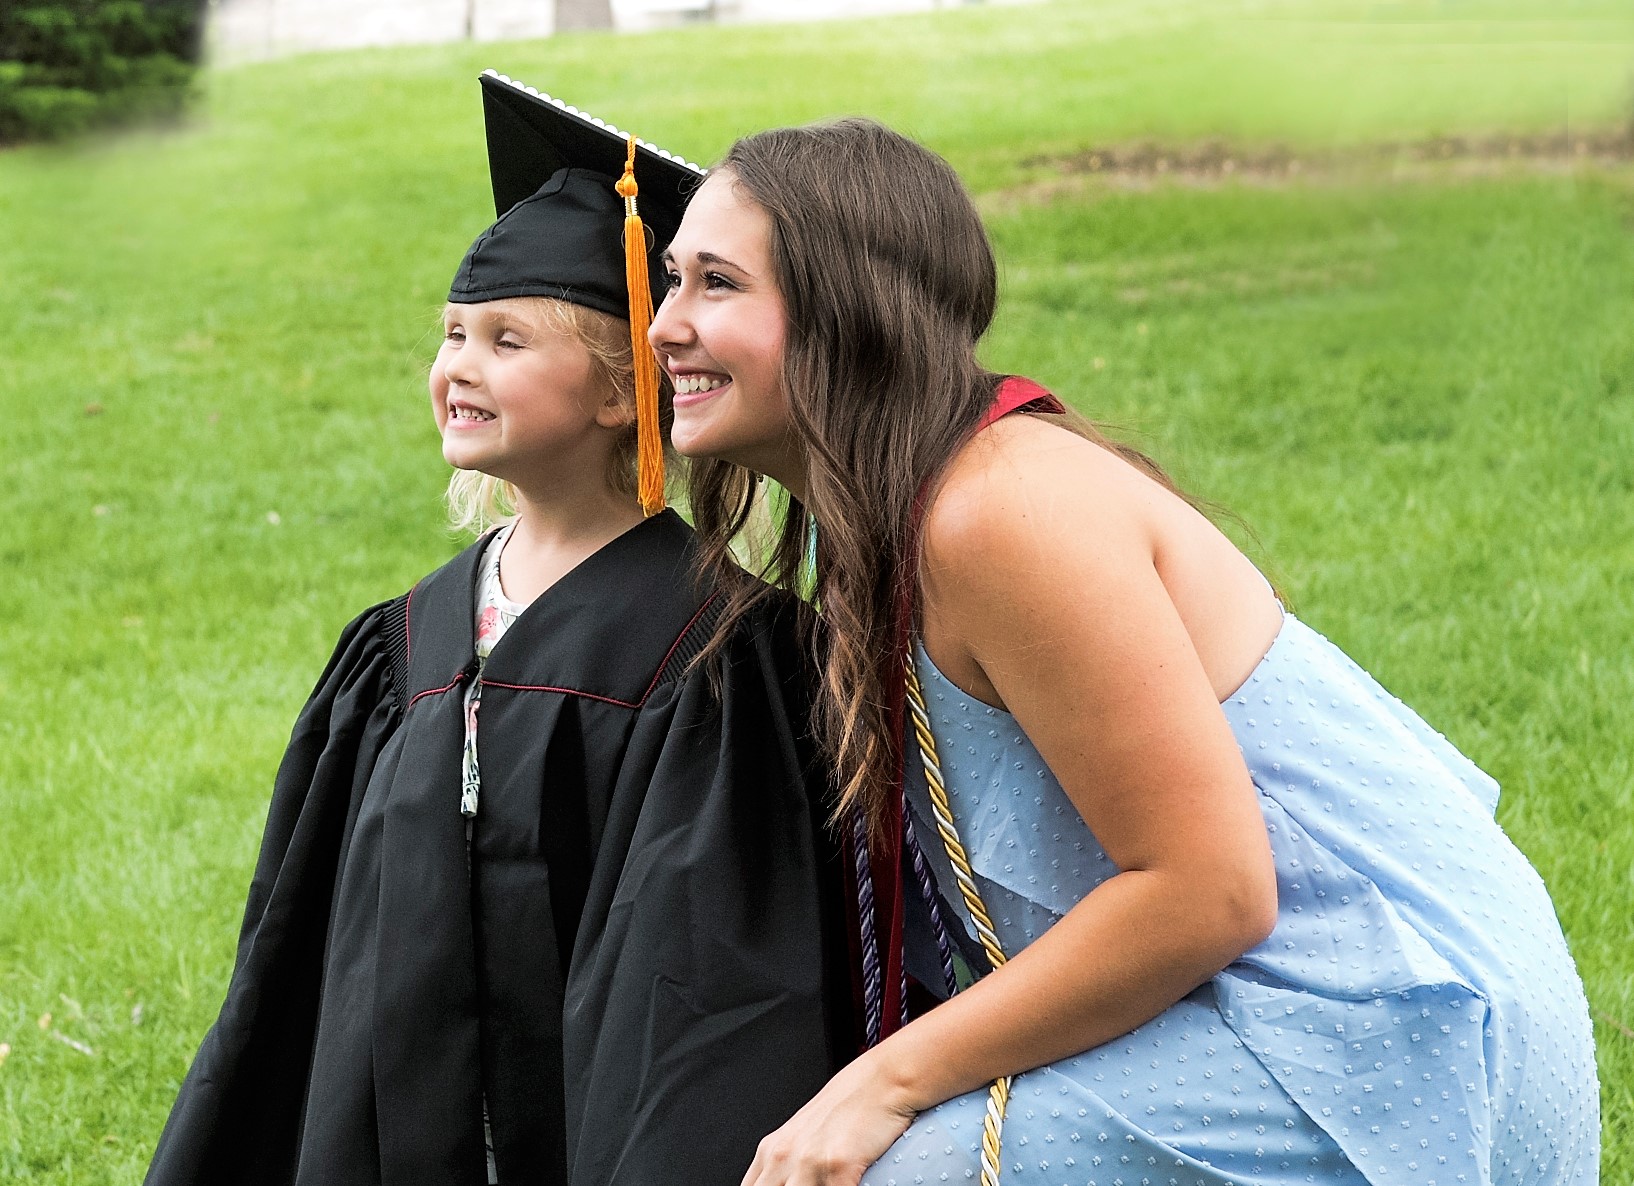 Young woman and little girl wearing mortar board